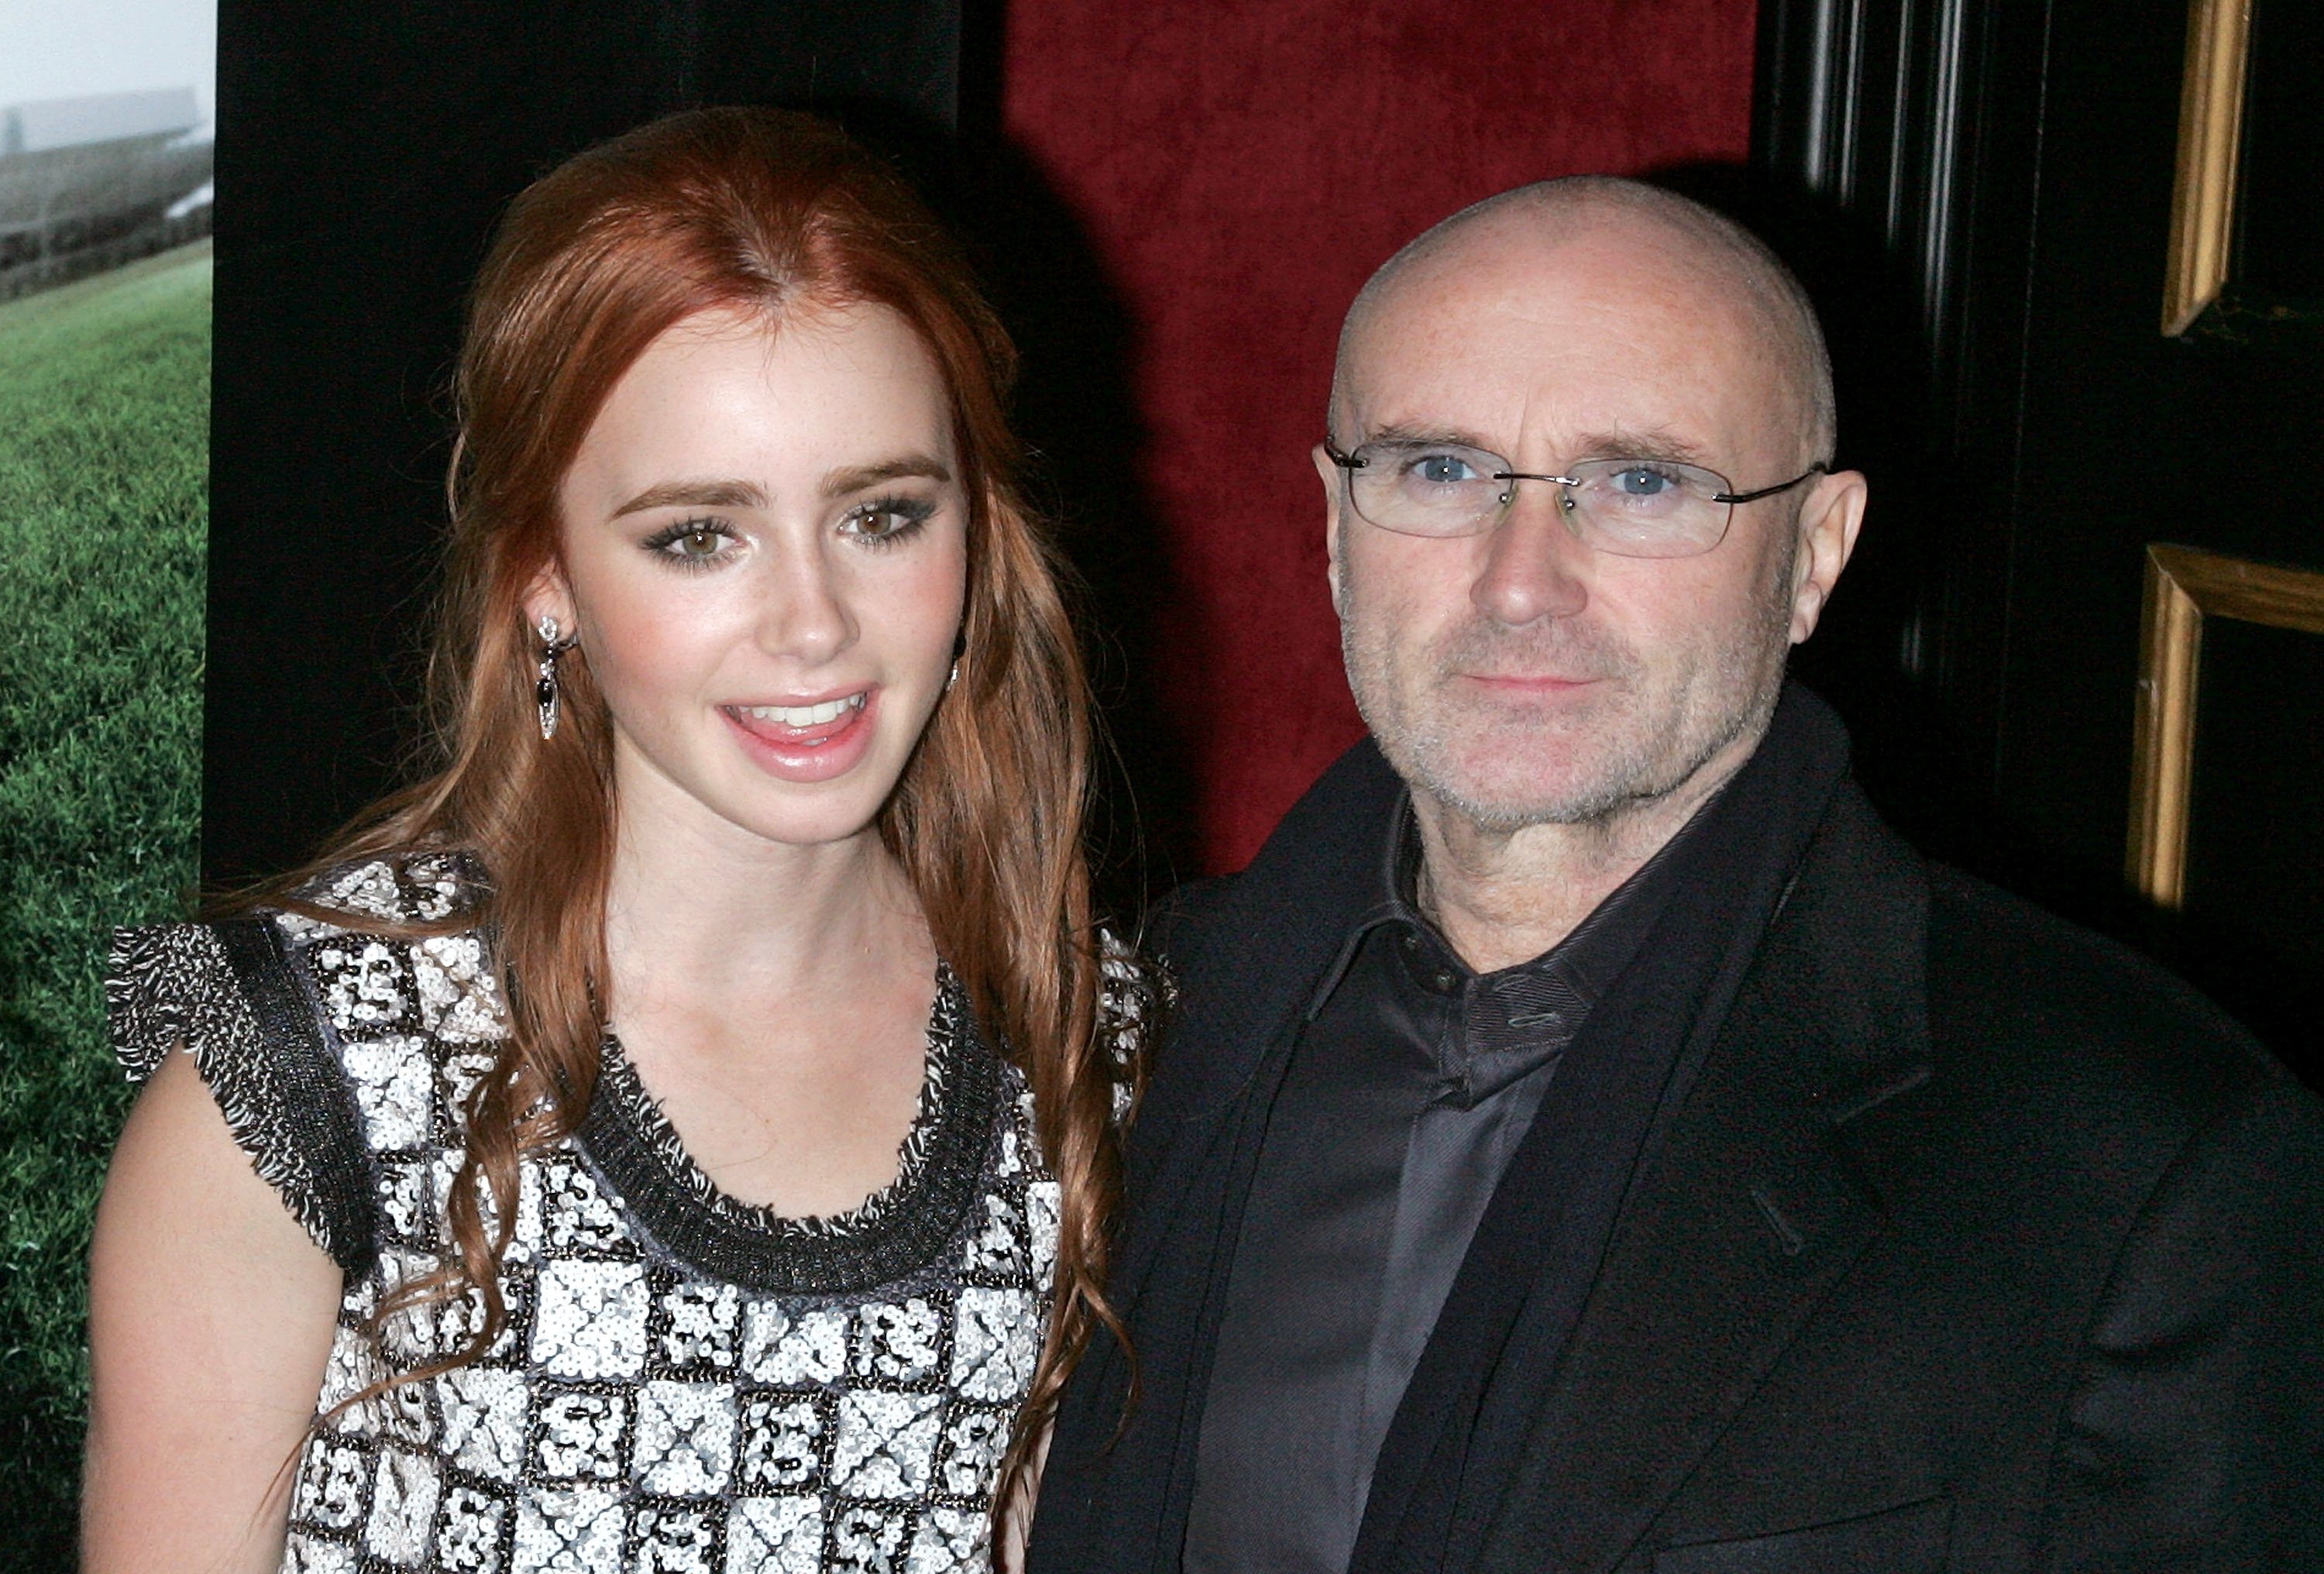 Lily Collins and Phil Collins attend 'The Blind Side' premiere on November 17, 2009 in New York City.